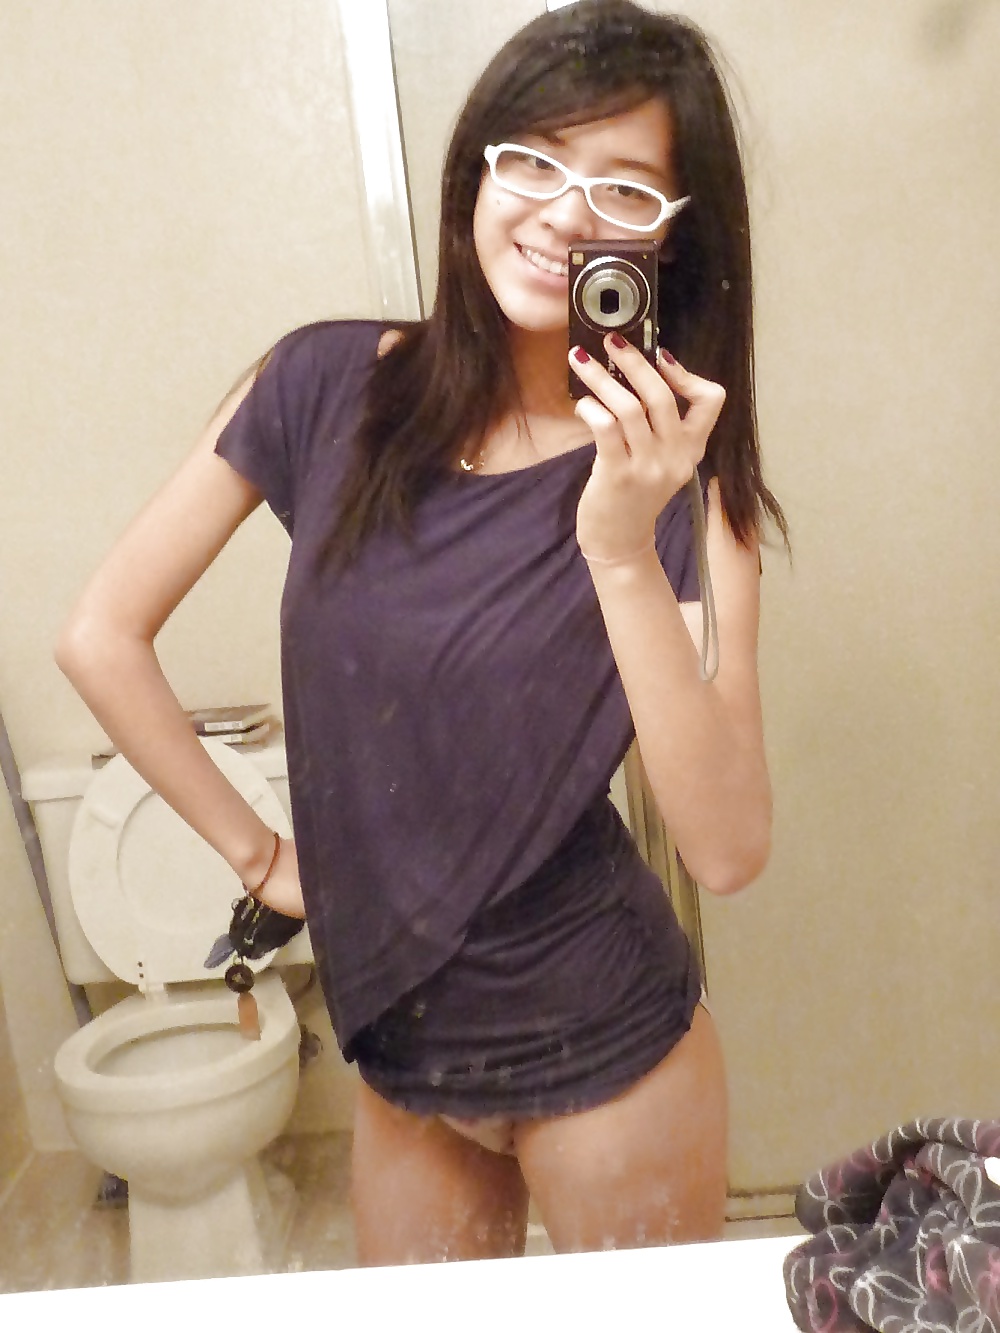 Nude asian girls with glasses